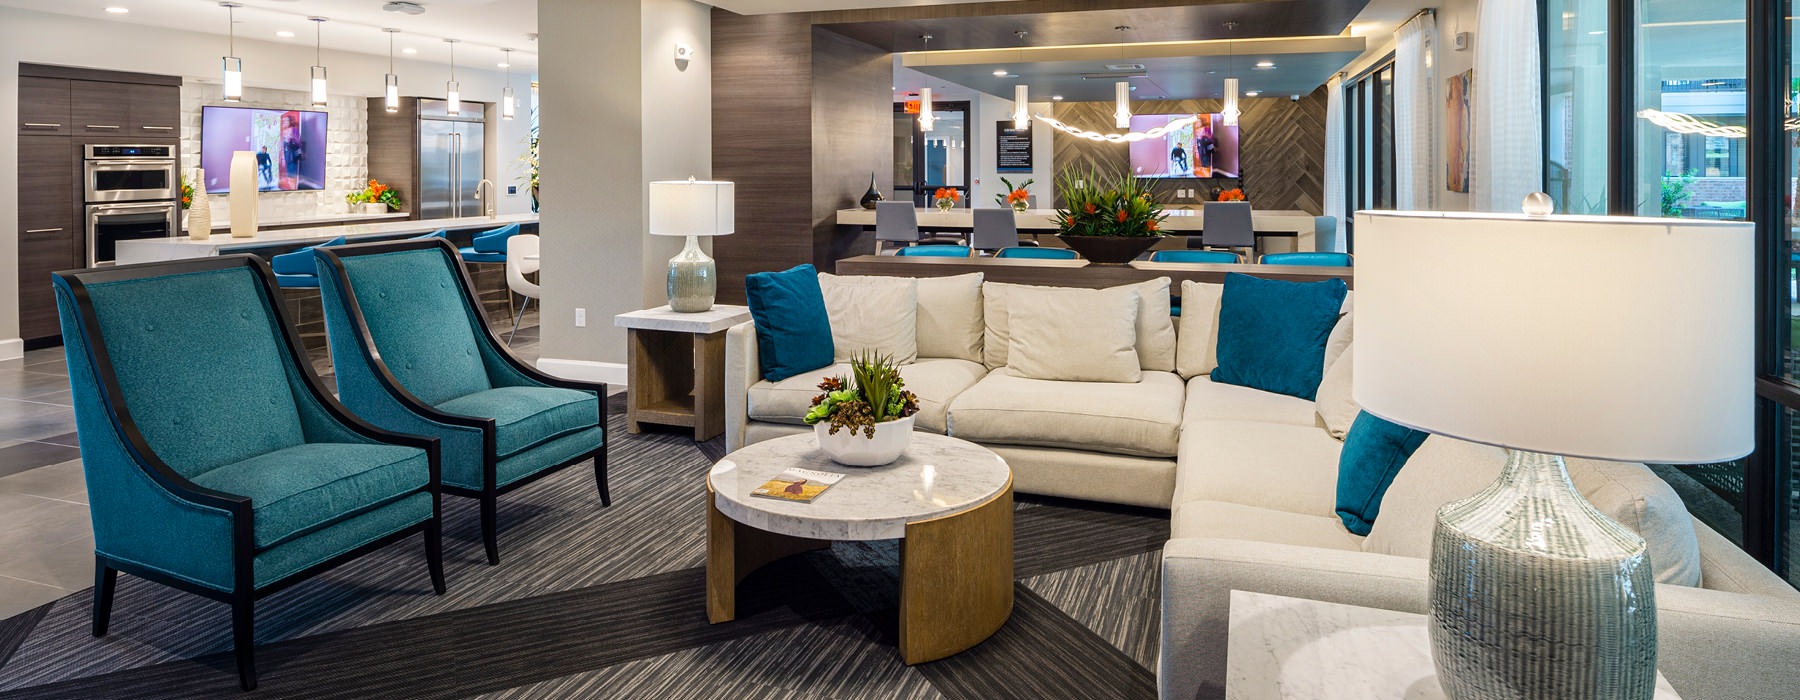 couches and plush chairs in amply lit clubhouse